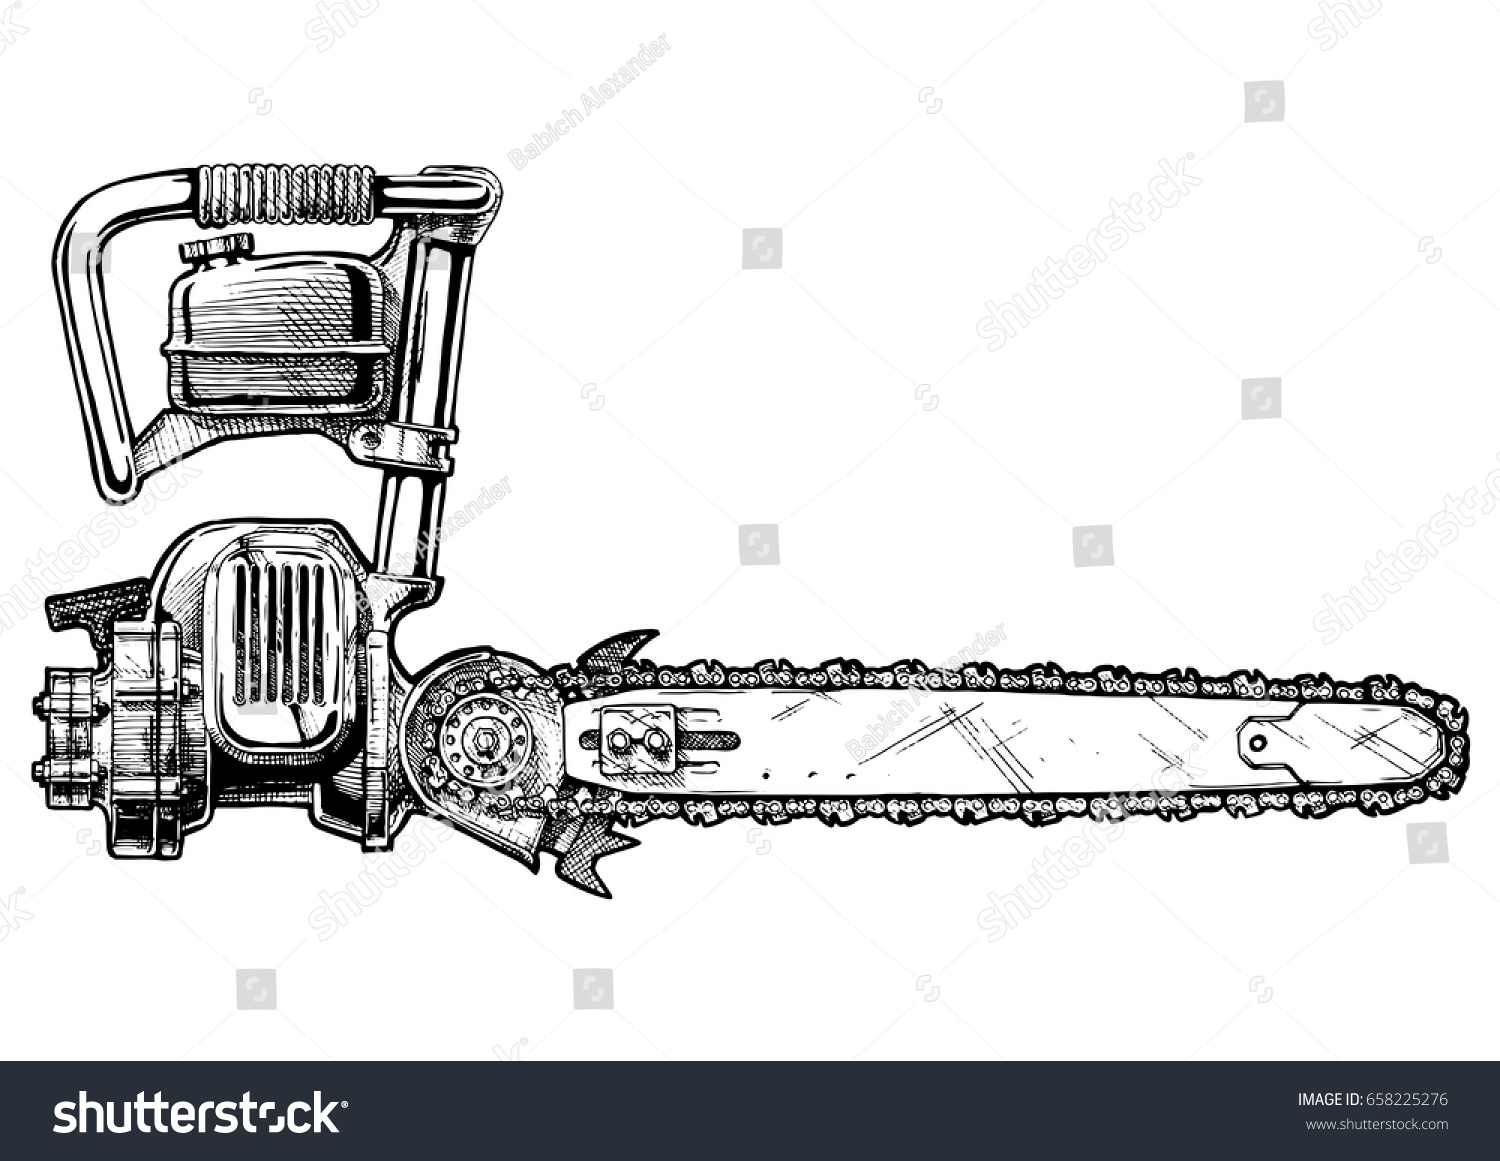 Chainsaw sketch Images, Stock Photos & Vectors Shutterstock